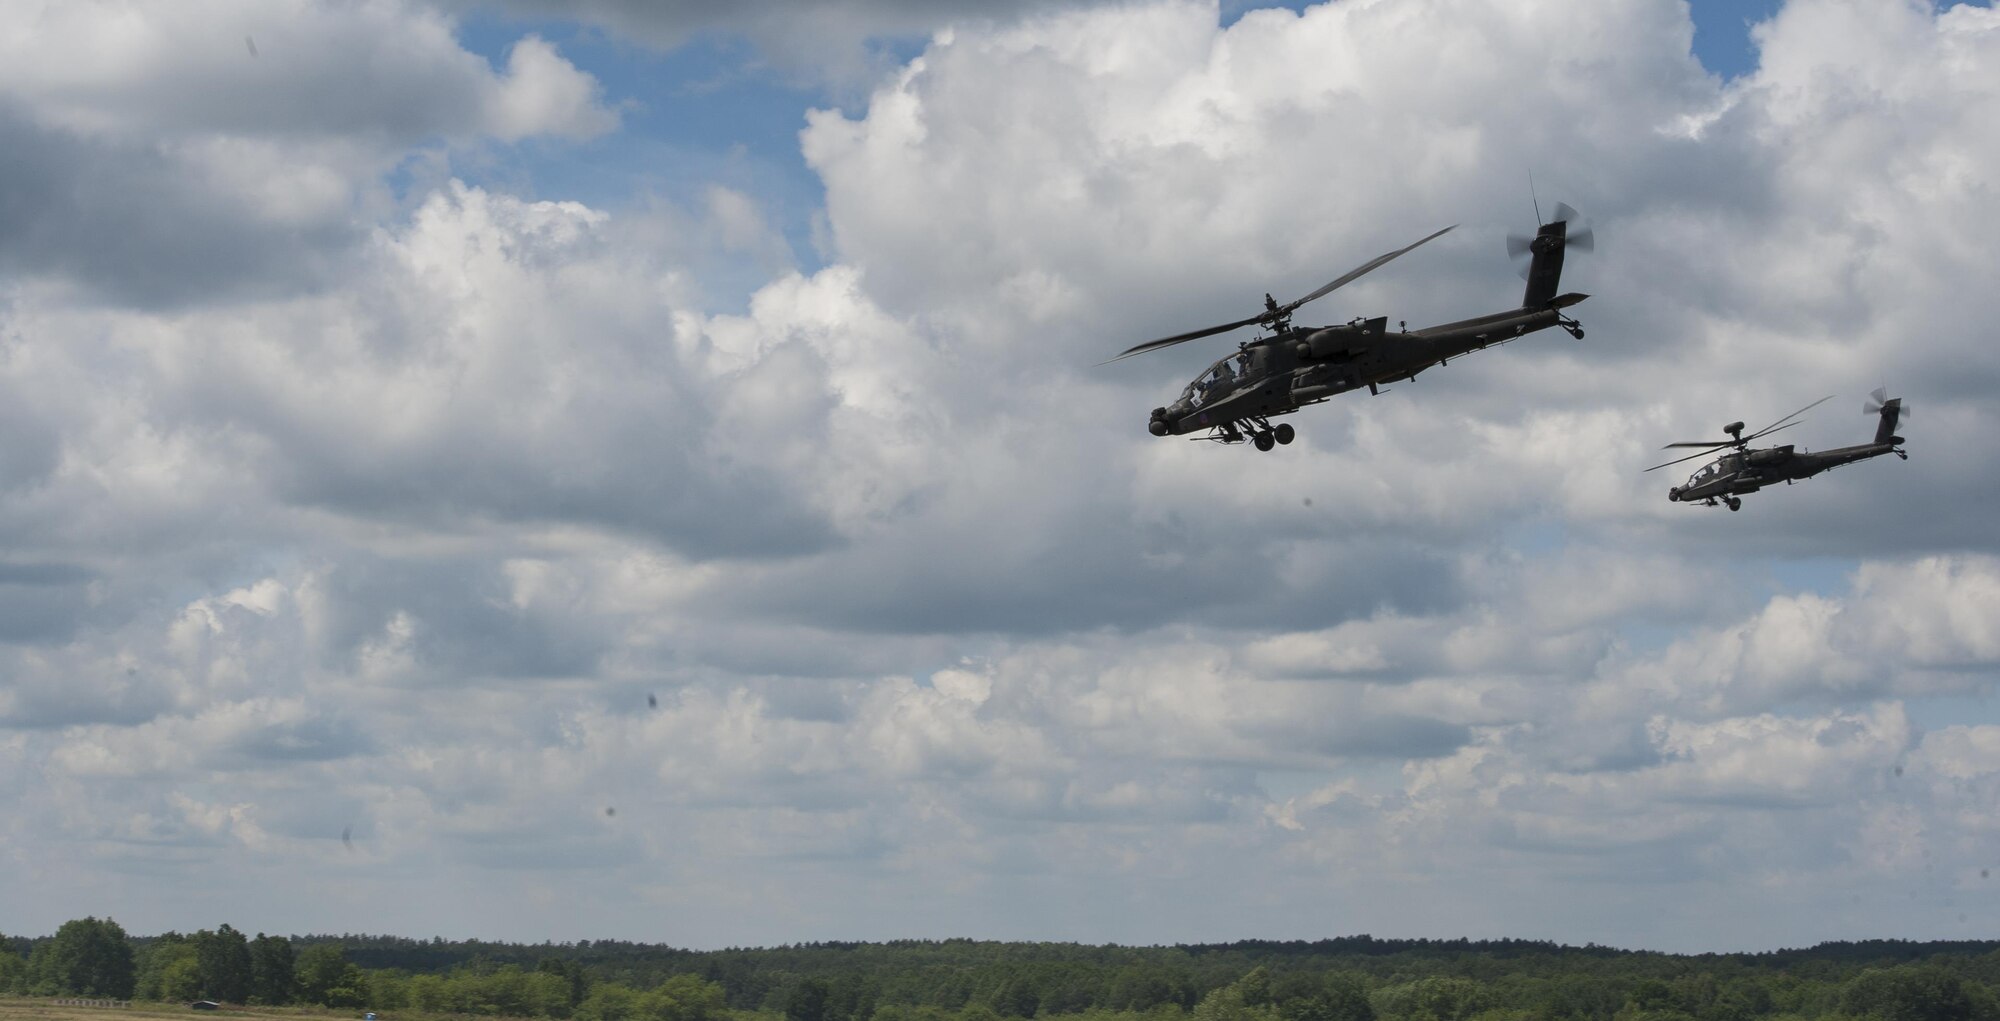 Two AH-64 Apache attack helicopters fly over a live-fire range during Exercise Anakonda 2016 June 16, 2016, in Poland. The event was an opportunity for U.S. Airmen to train alongside allies and test aircraft, vehicles and other equipment in a live-fire exercise. The event served as a wrap up for Anakonda 2016, a Polish-led international exercise that aimed to train, exercise and integrate Poland and its allied forces by demonstrating their defense capabilities to deploy in mass numbers and sustain combat power. (U.S. Air Force photo/Airman 1st Class Lane T. Plummer)